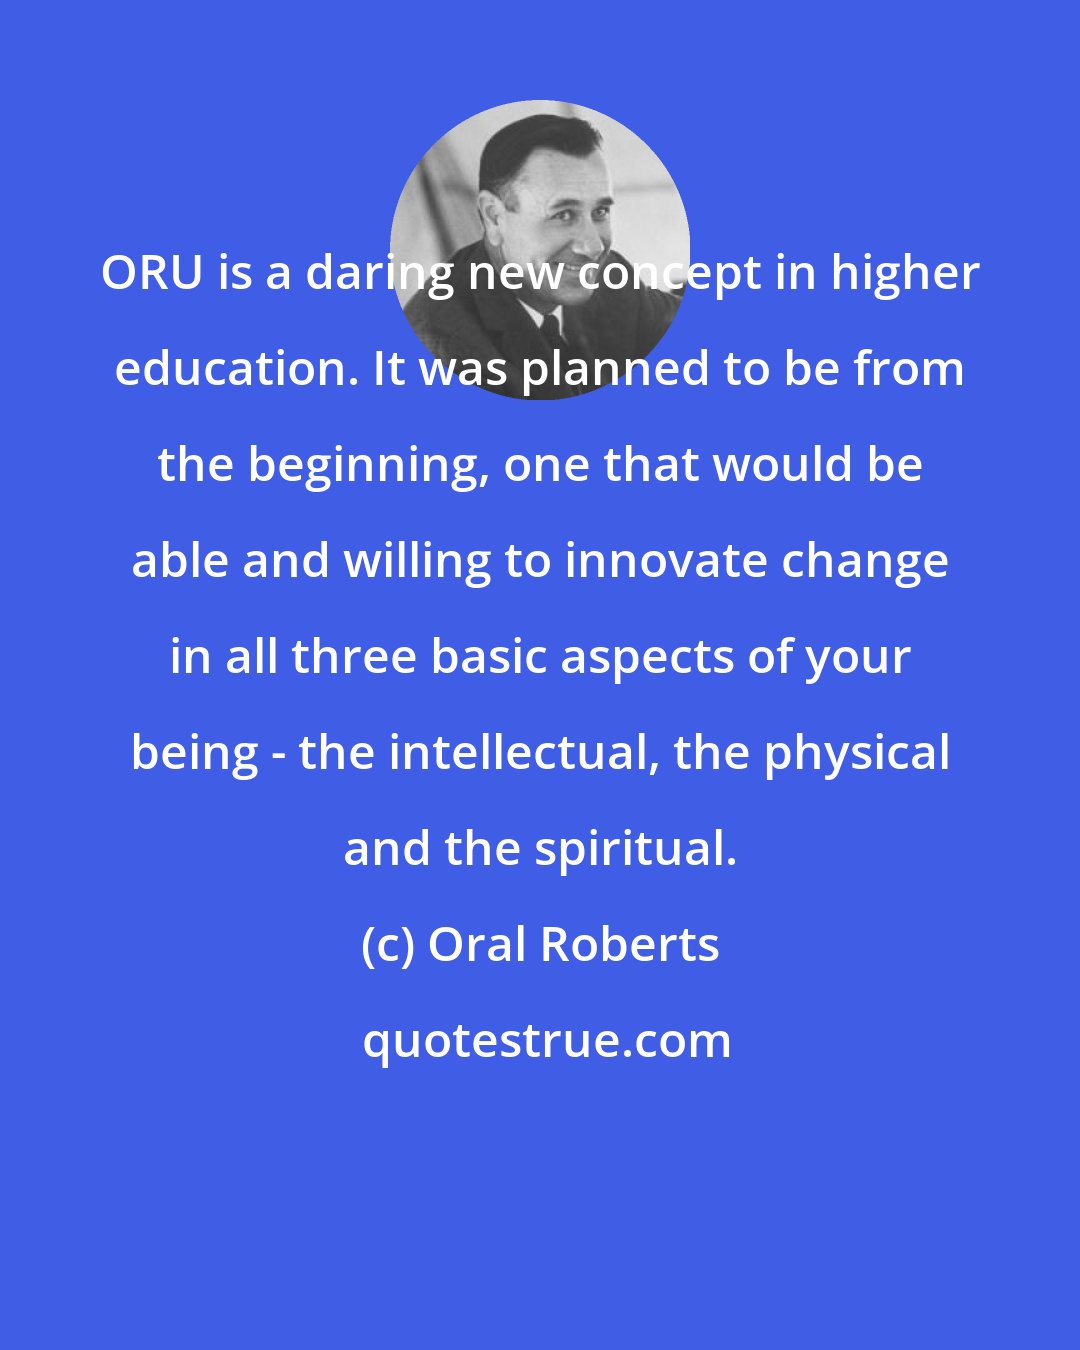 Oral Roberts: ORU is a daring new concept in higher education. It was planned to be from the beginning, one that would be able and willing to innovate change in all three basic aspects of your being - the intellectual, the physical and the spiritual.